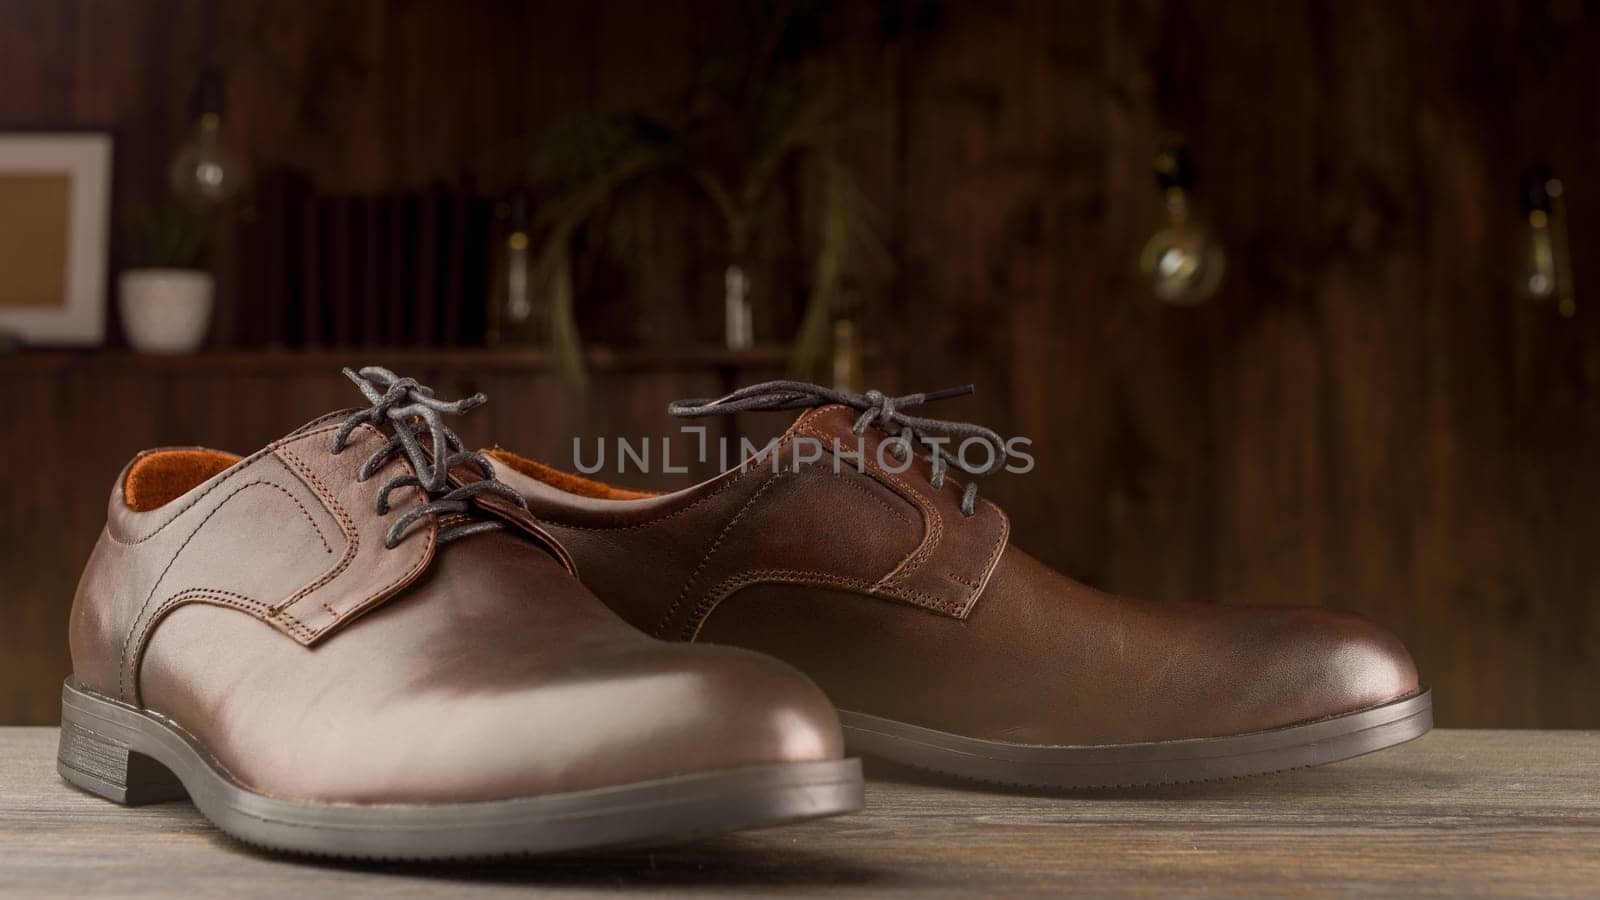 Fashionable men's classic brown shoes on a wooden background by zartarn